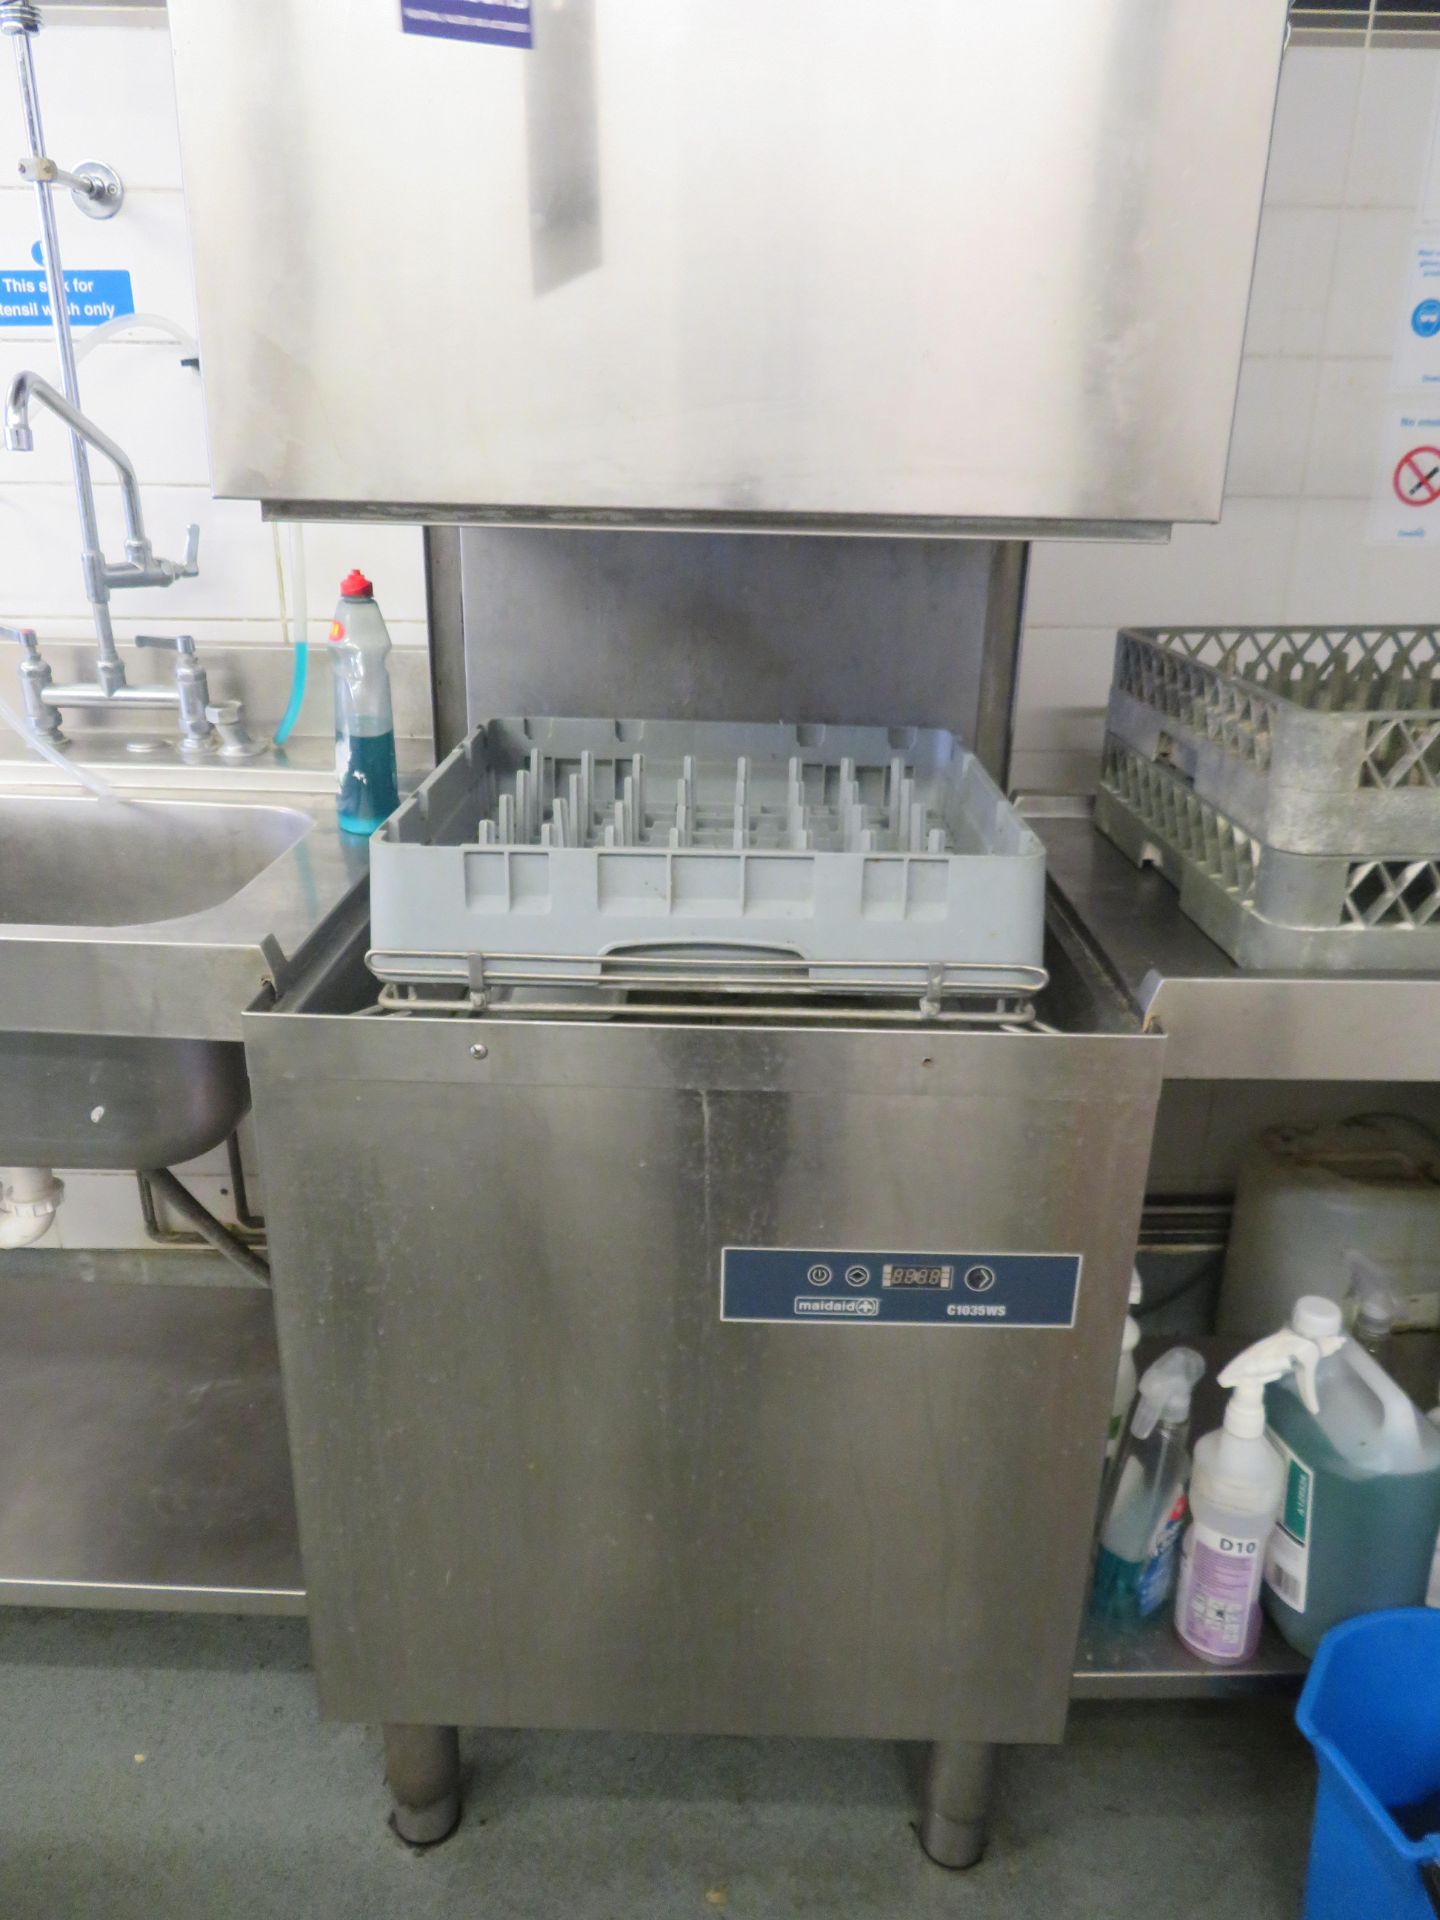 Maidaid C1035WS Dishwasher with Washdown Sink and Takeaway Table - Image 3 of 8